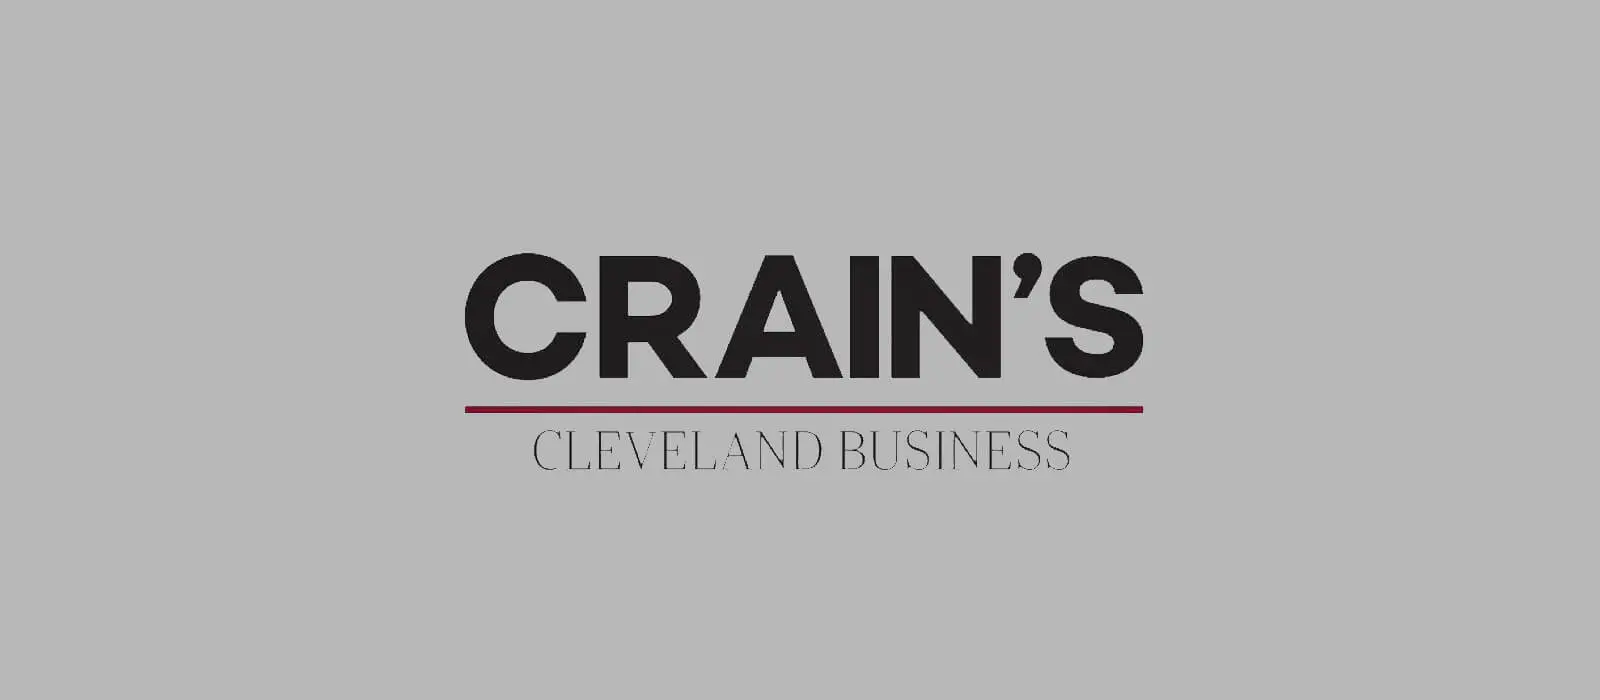 Weston & Associates Featured Crain's Cleveland Business featured image